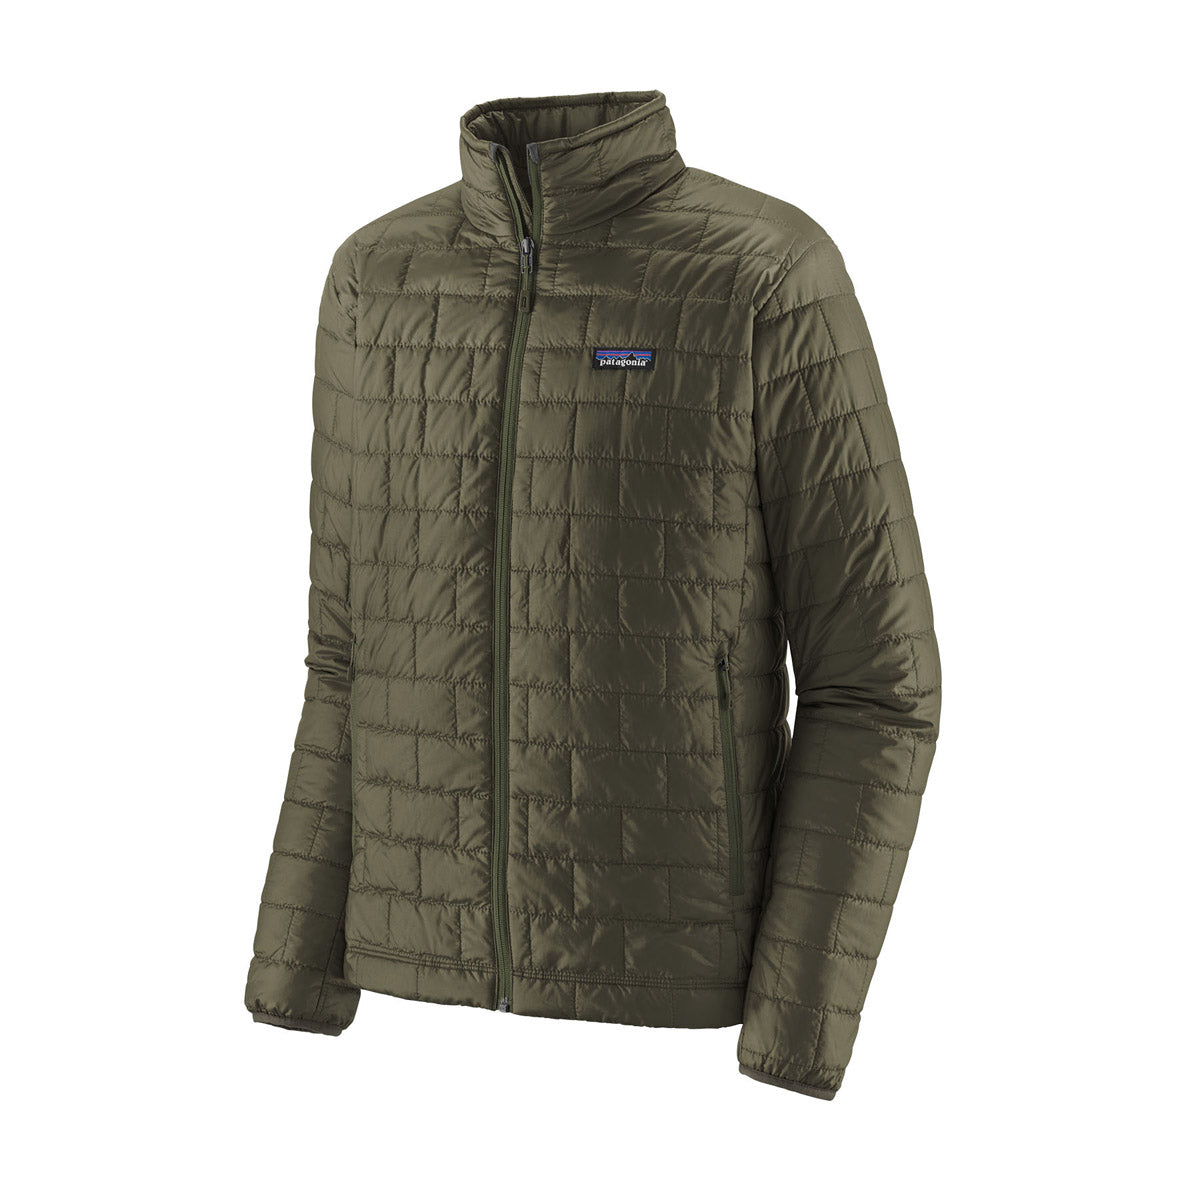 Men's Nano Puff Jacket - Gearhead Outfitters